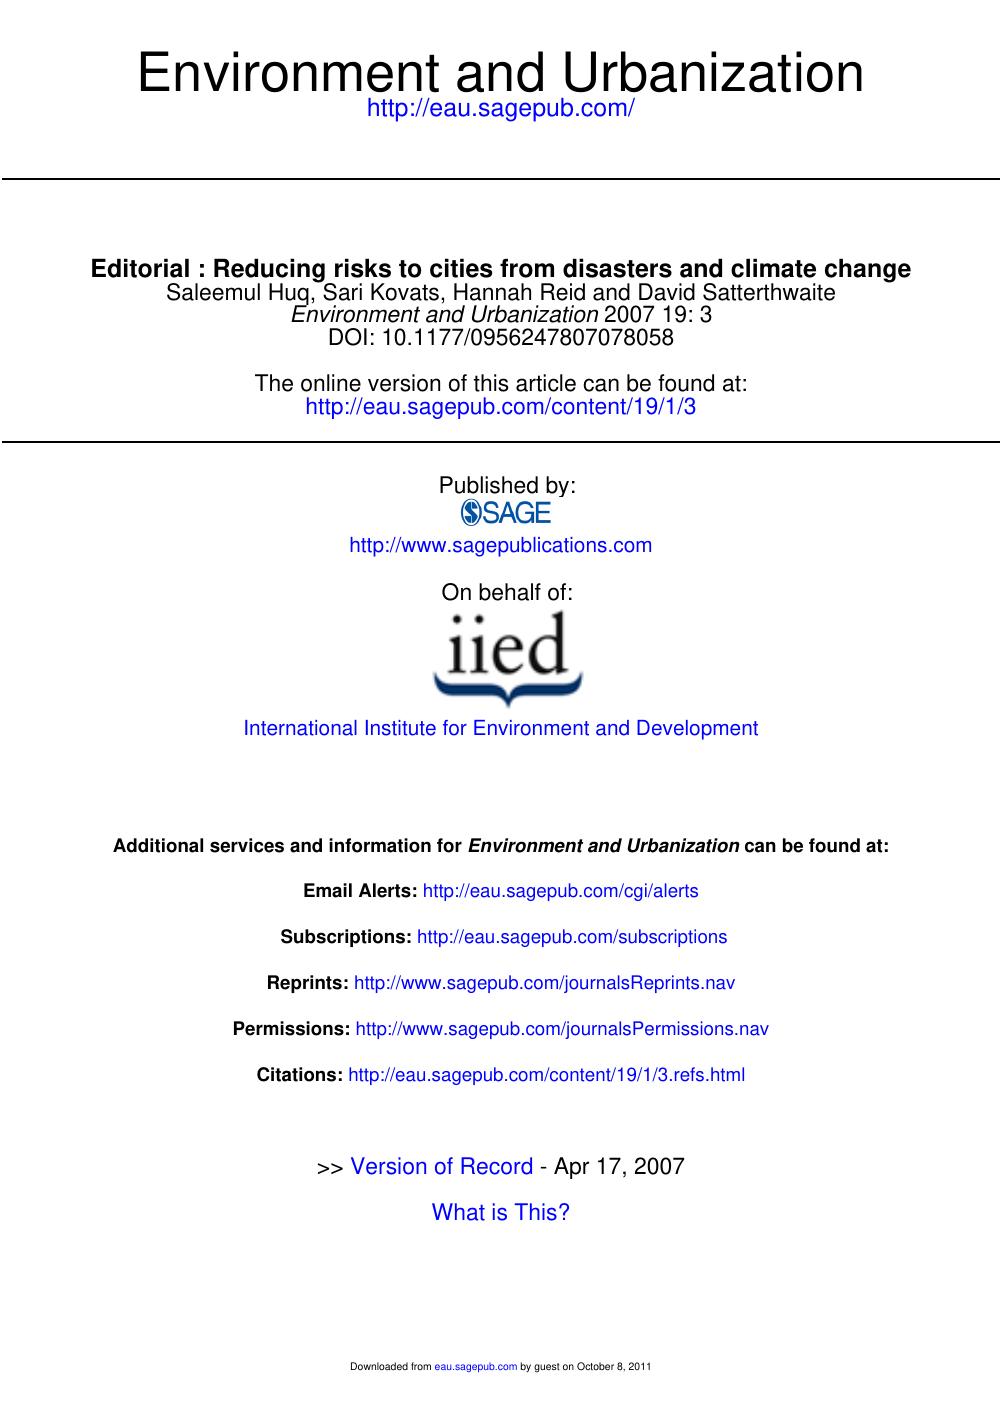 Editorial  Reducing risks to cities from disasters and climate change. 2007